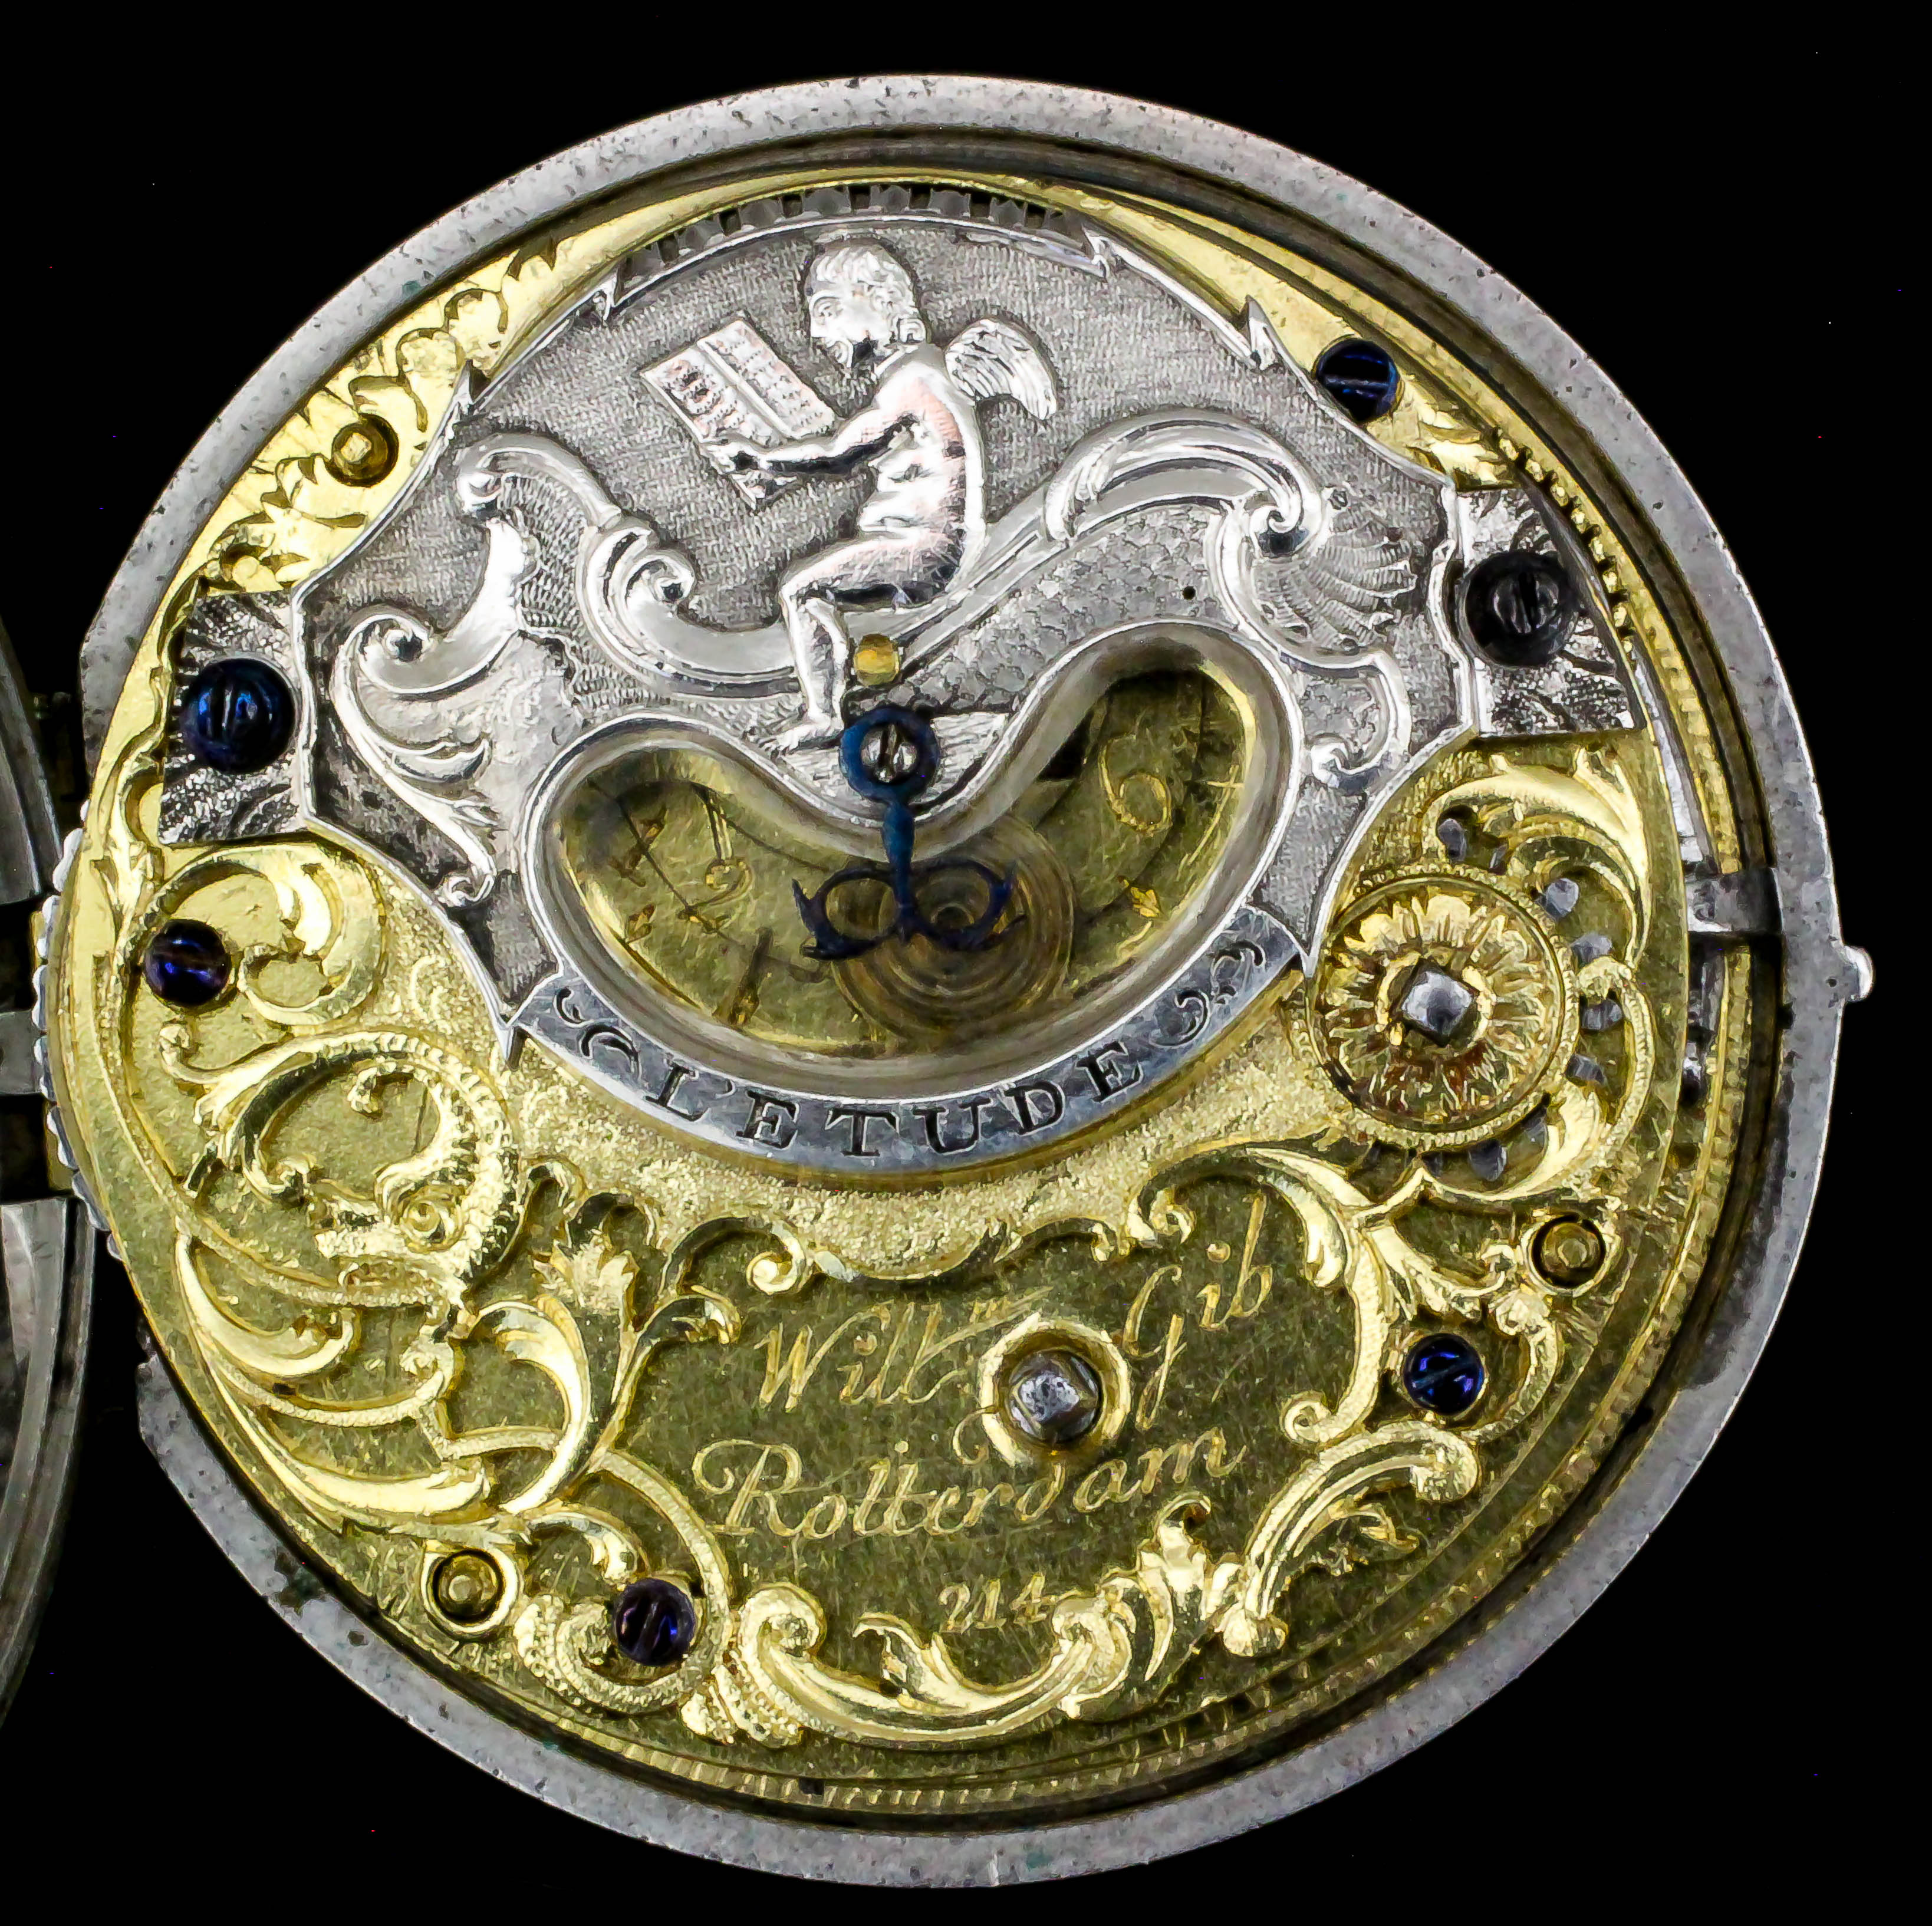 An unusual mid 18th Century silver pair cased verge pocket watch by William Gib of Rotterdam, No. - Image 3 of 5